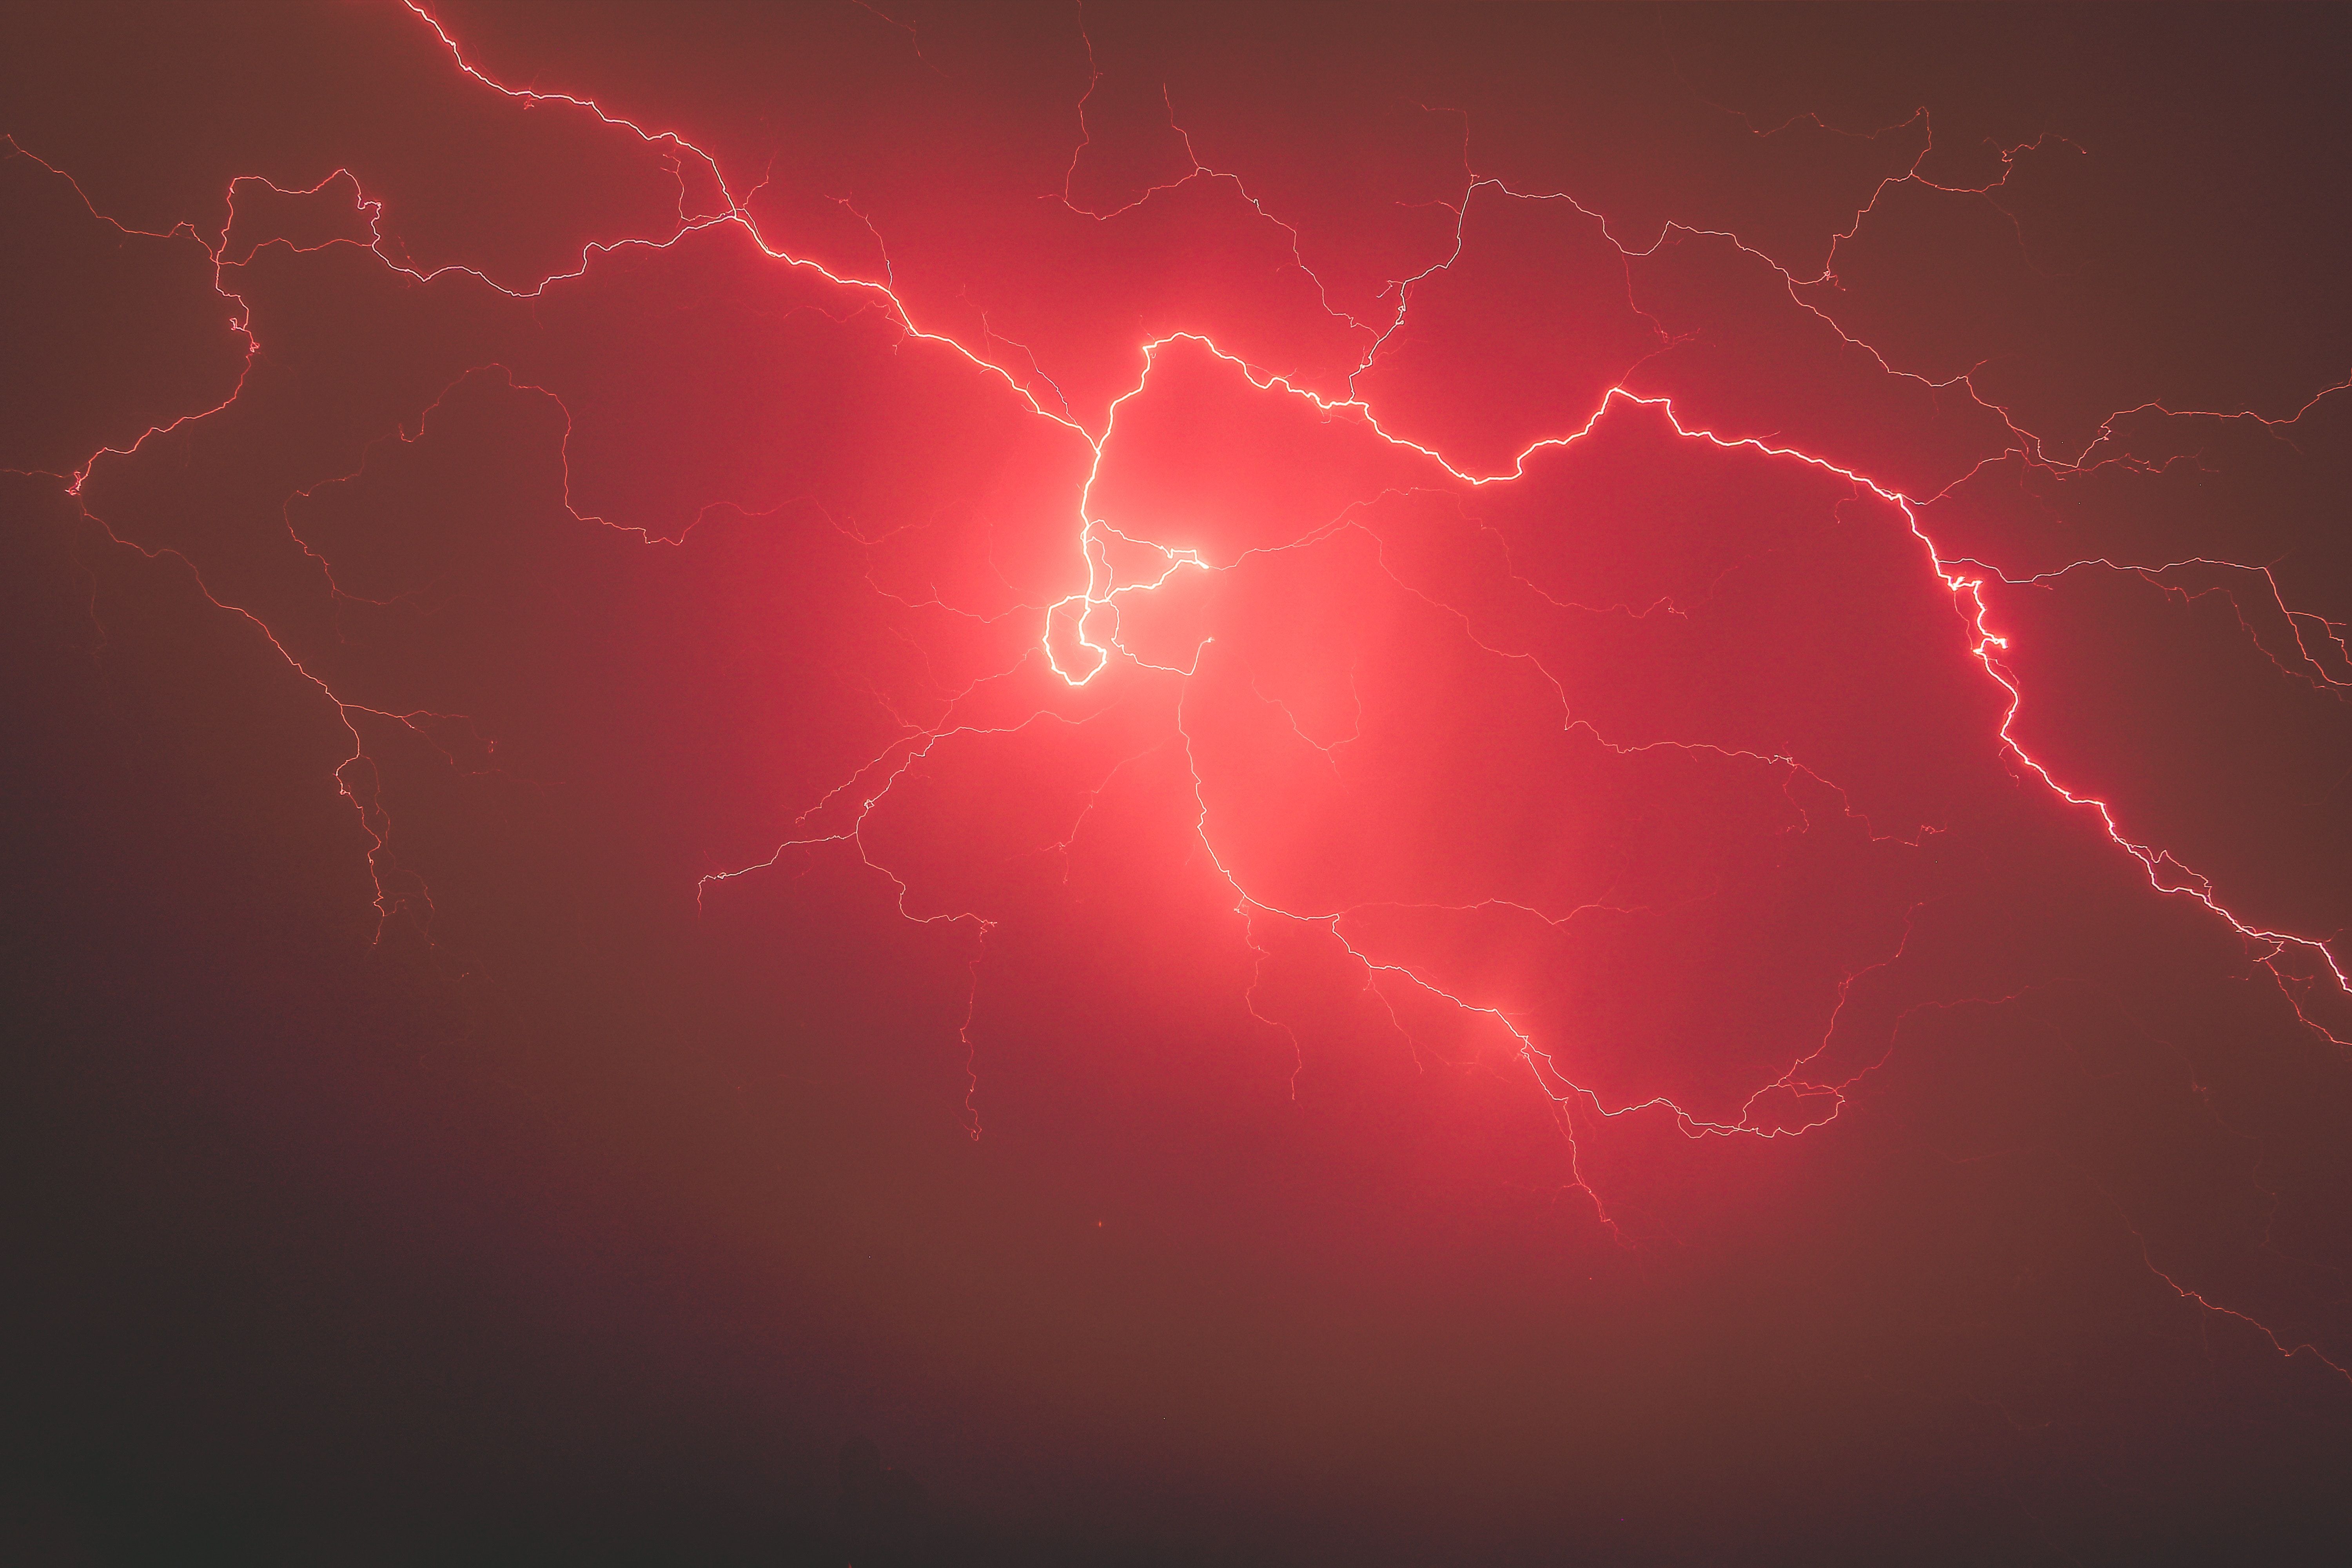 6000x4000 #storm clouds, #strike, #red, #dramatic, #weather, #red sky, #rain, #thunder, #background, #light trail, #nature, #thunderstorm, # sky, #dramatic sky, #storm, #lightning streak, #lightning, #Public domain image. Mocah HD Wallpaper